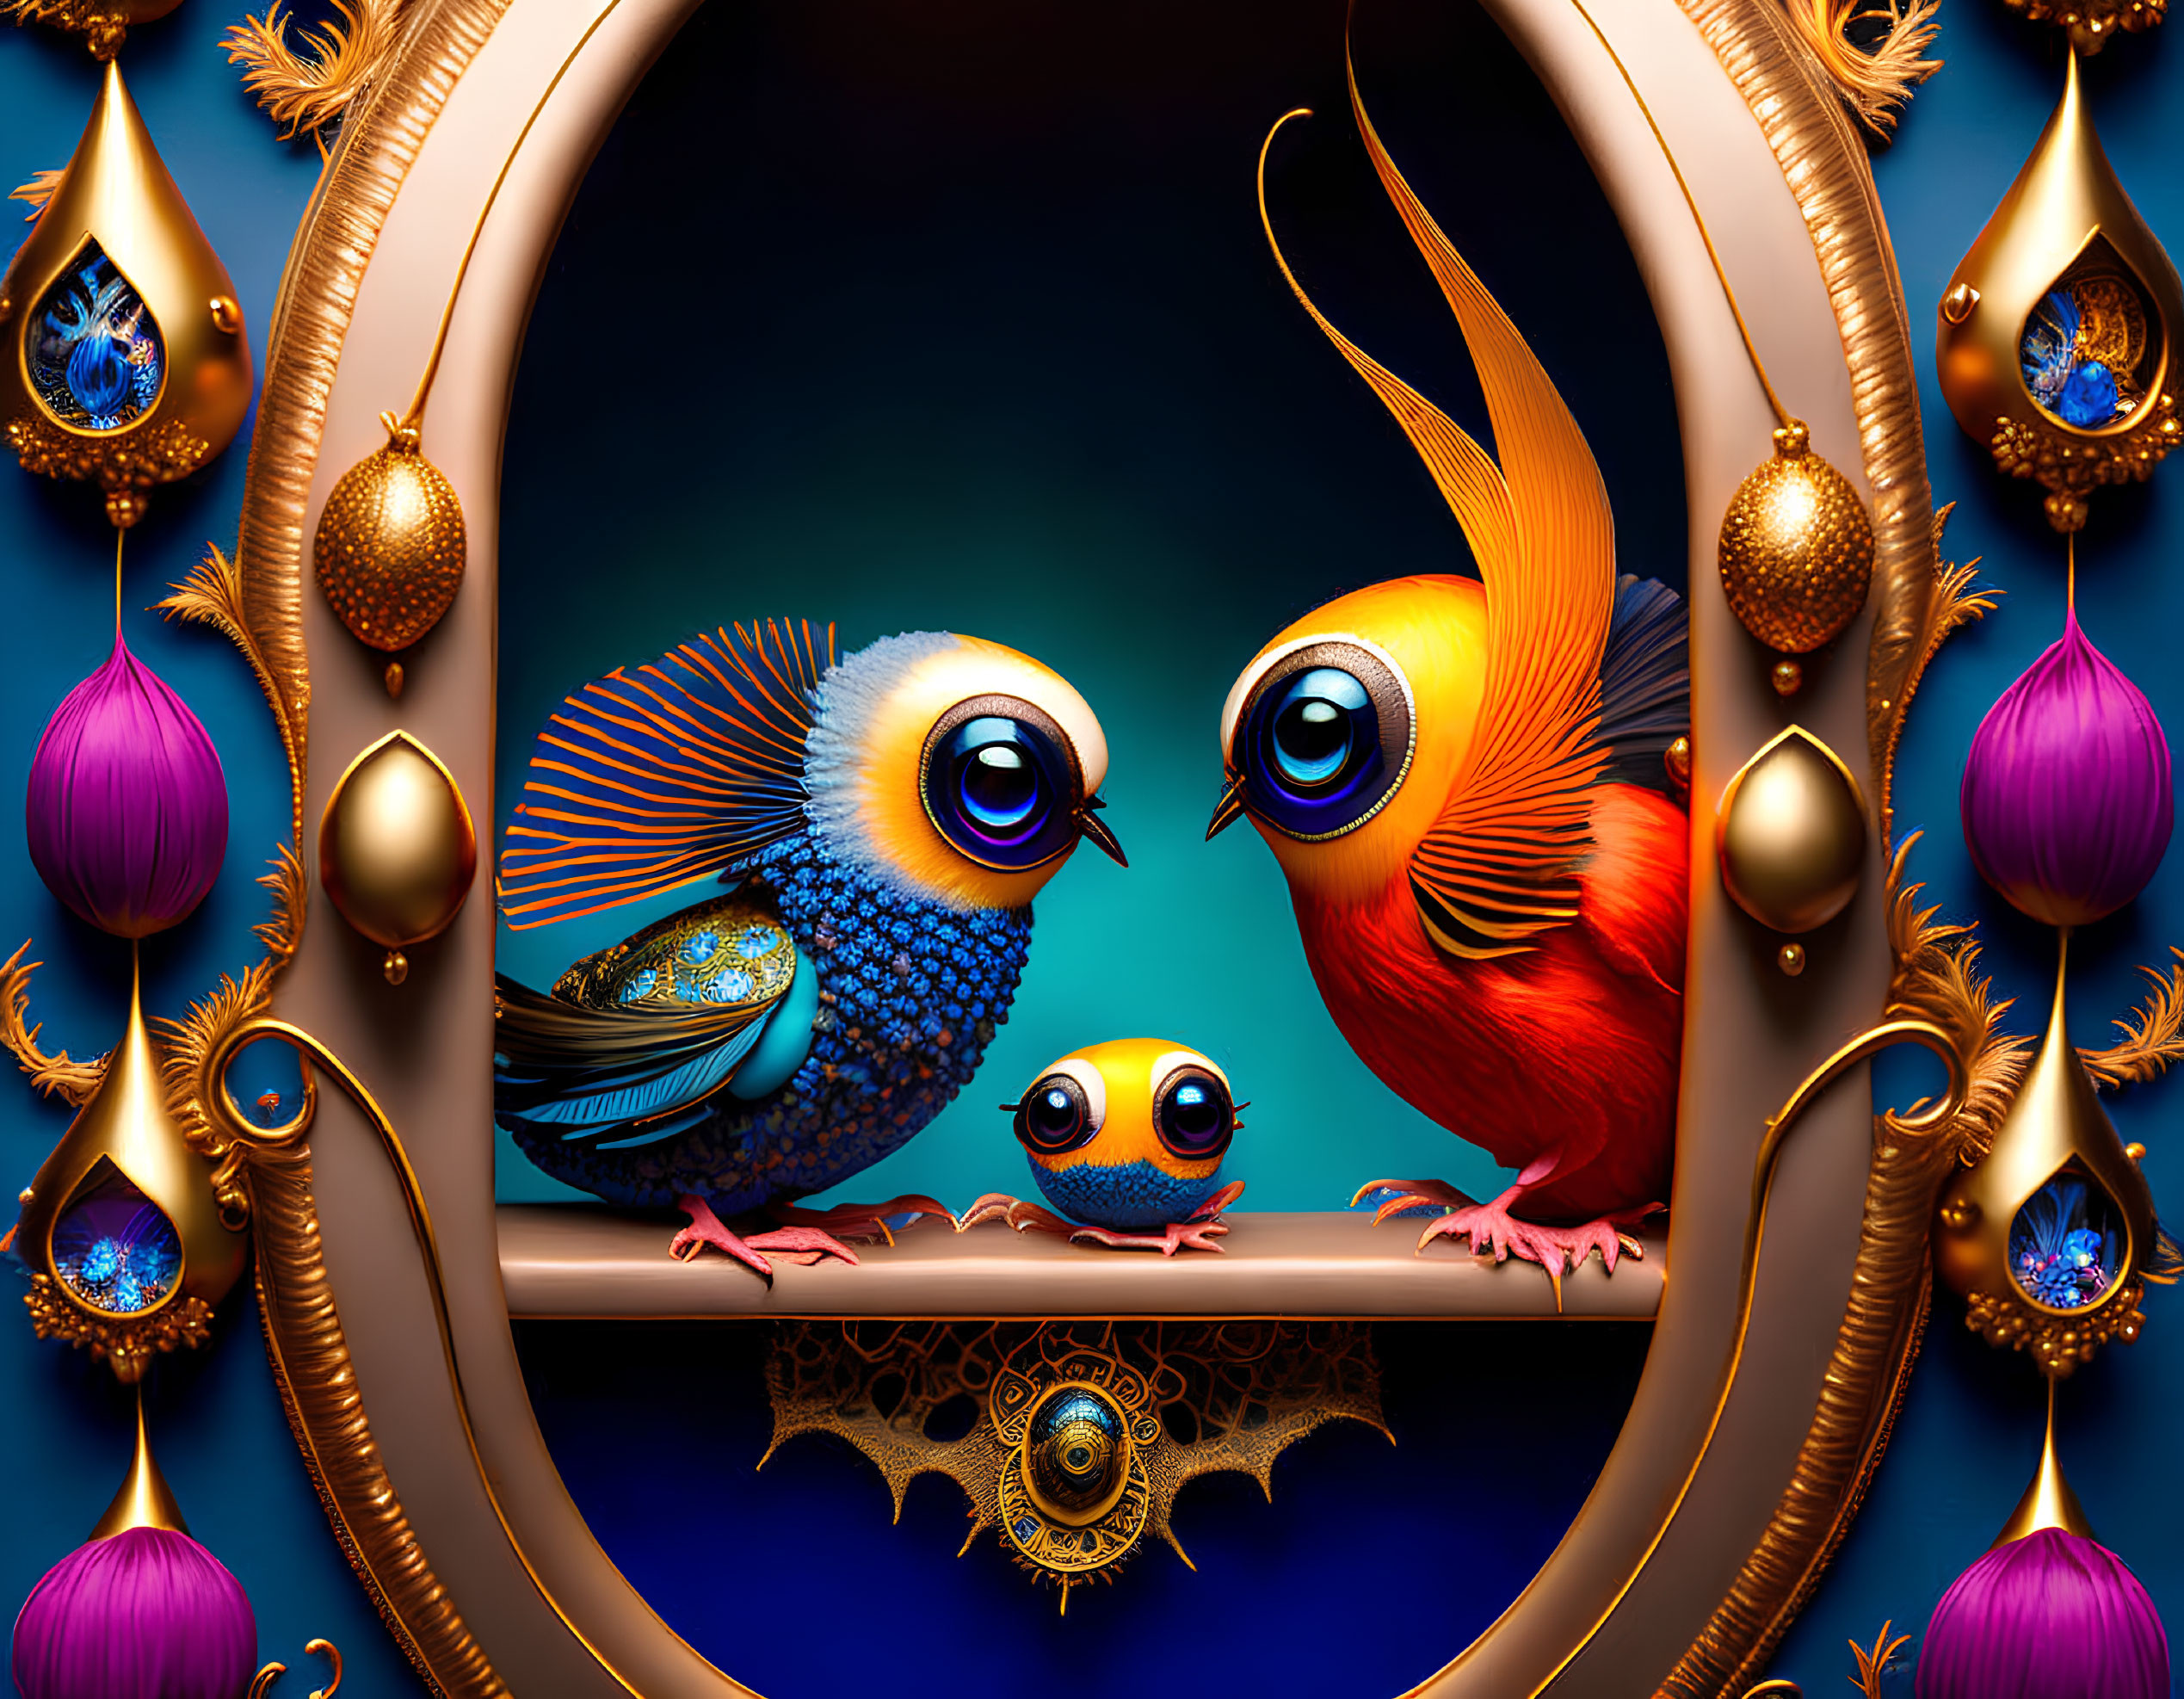 Colorful whimsical birds with oversized eyes on decorative perch, with chick and ornate golden embellishments